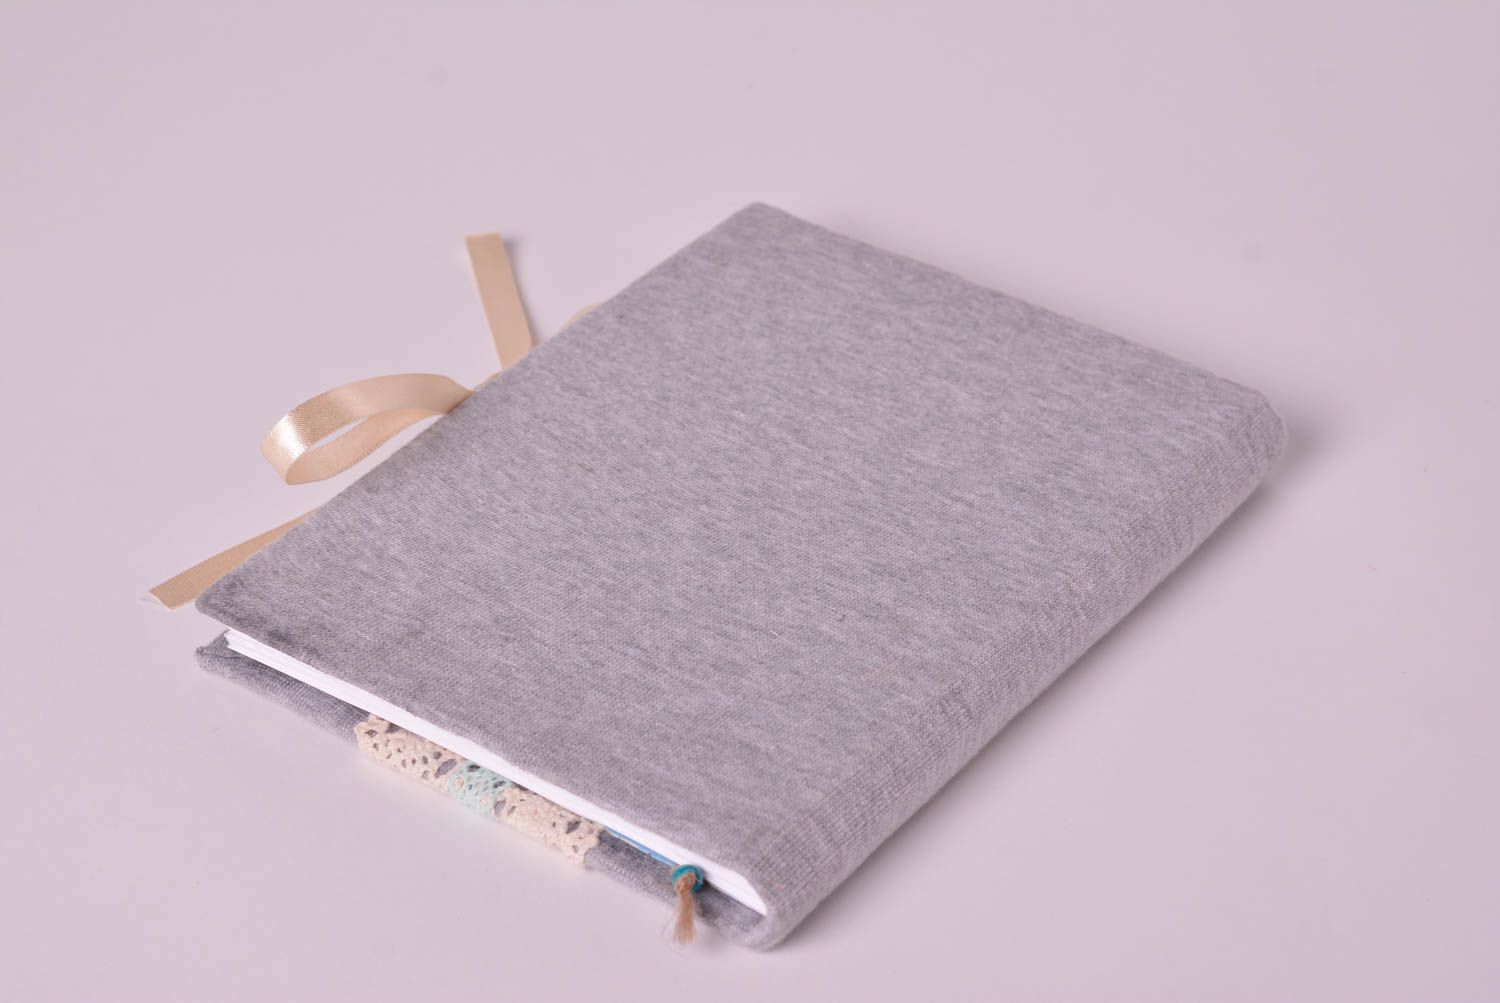 Handmade notebook handmade sketchbook gray notepad with lace cover cute notebook photo 4